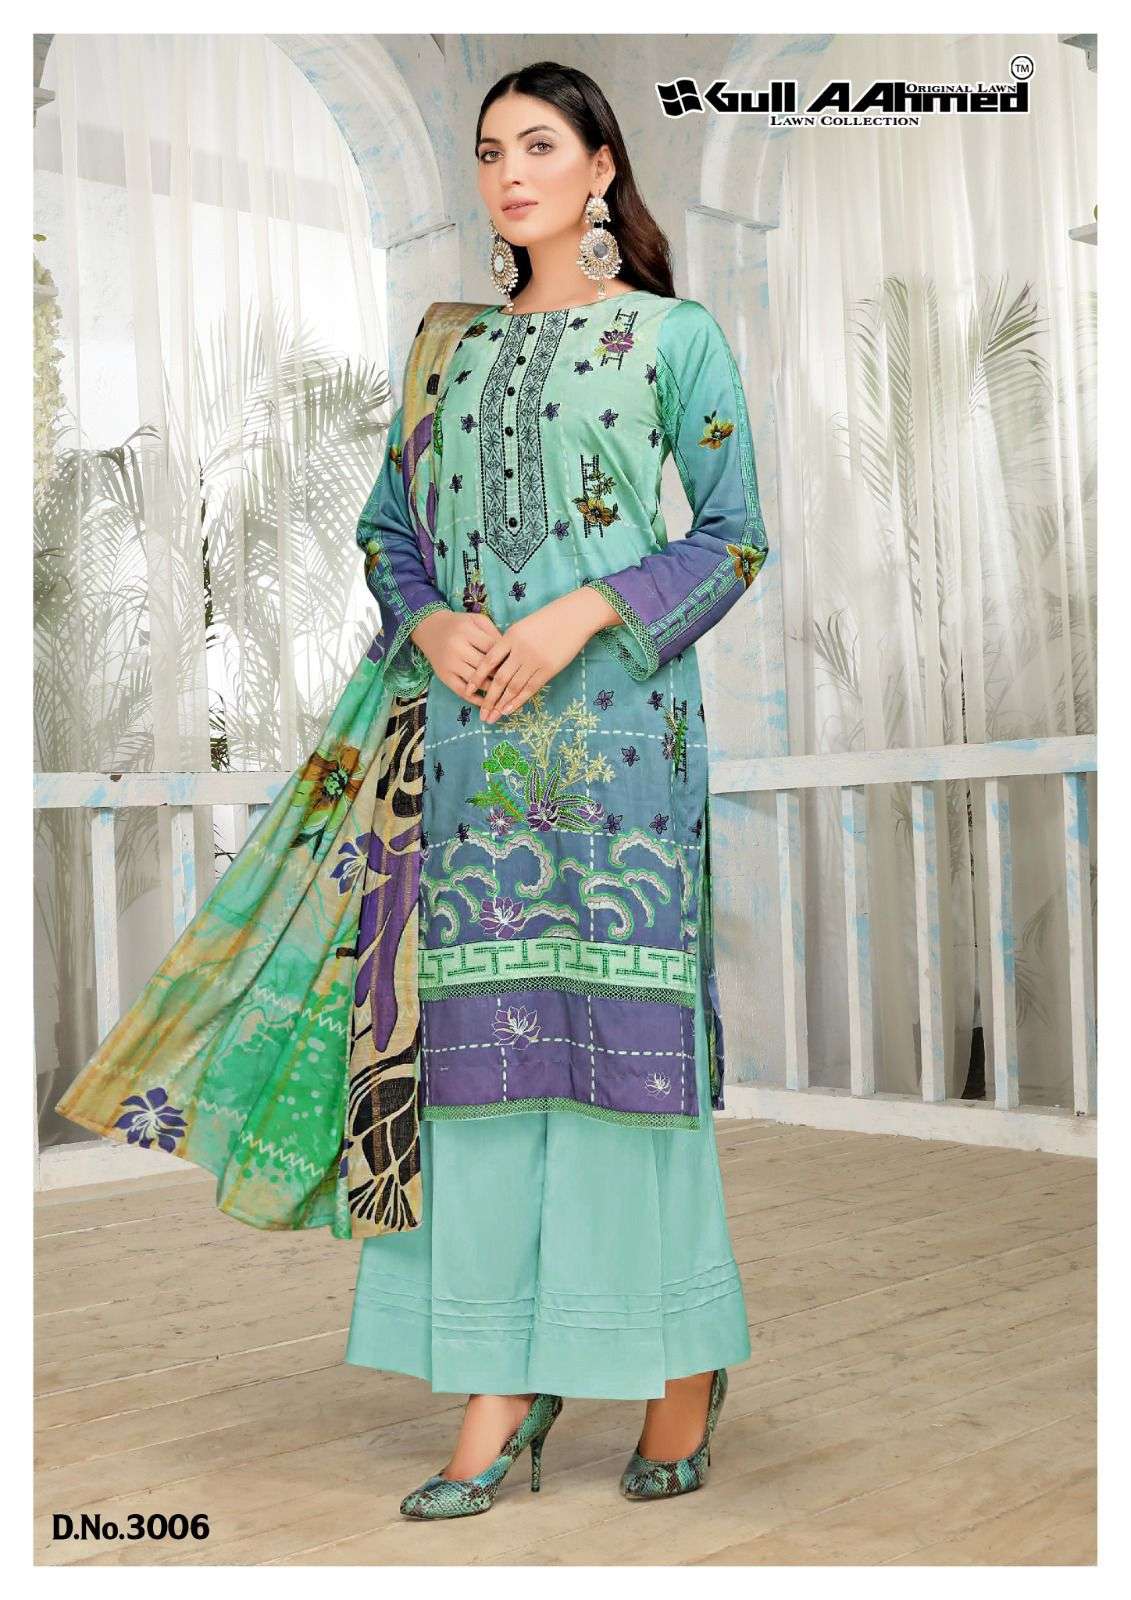 GULL AAHMED MINHAL EXCLUSIVE LAWN COLLECTION VOL 3